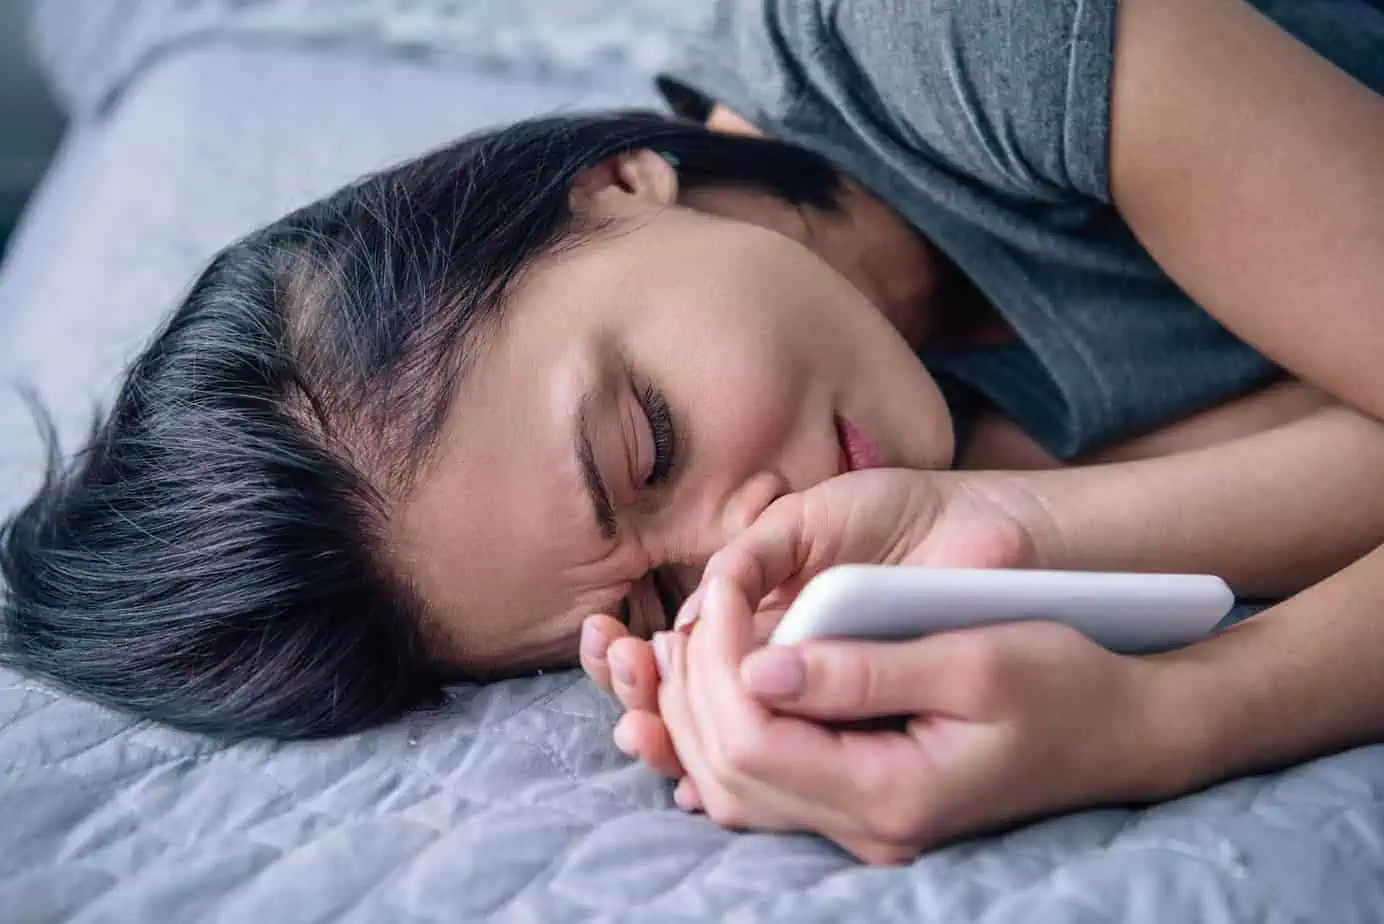 A woman sleeping on a bed holding a remote control